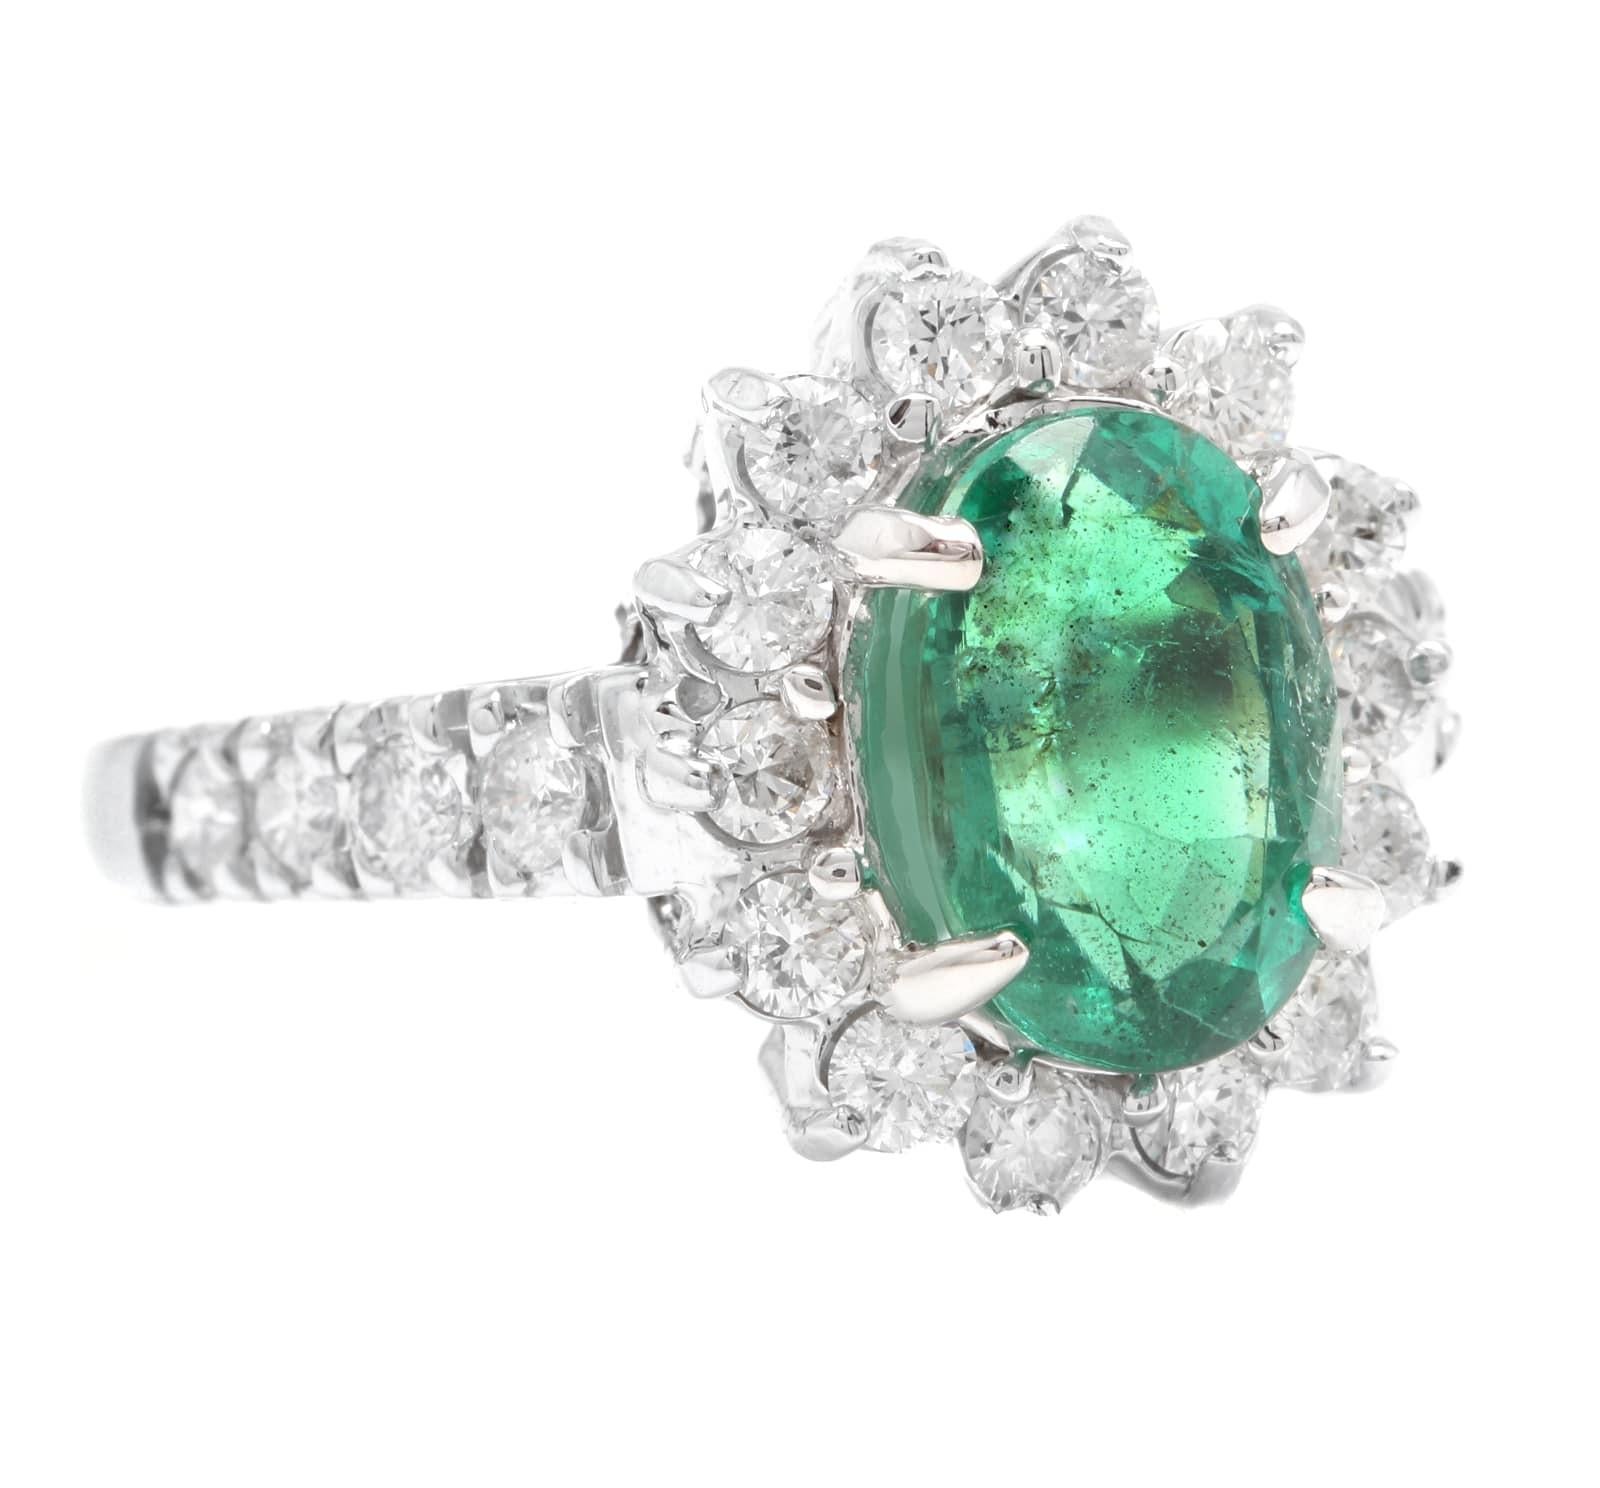 4.30 Carats Natural Emerald and Diamond 14K Solid White Gold Ring

Total Natural Green Emerald Weight is: Approx. 3.30 Carats (transparent)

Emerald Treatment: Oiling

Emerald Measures: 10 x 8mm

Natural Round Diamonds Weight: Approx. 1.00 Carats